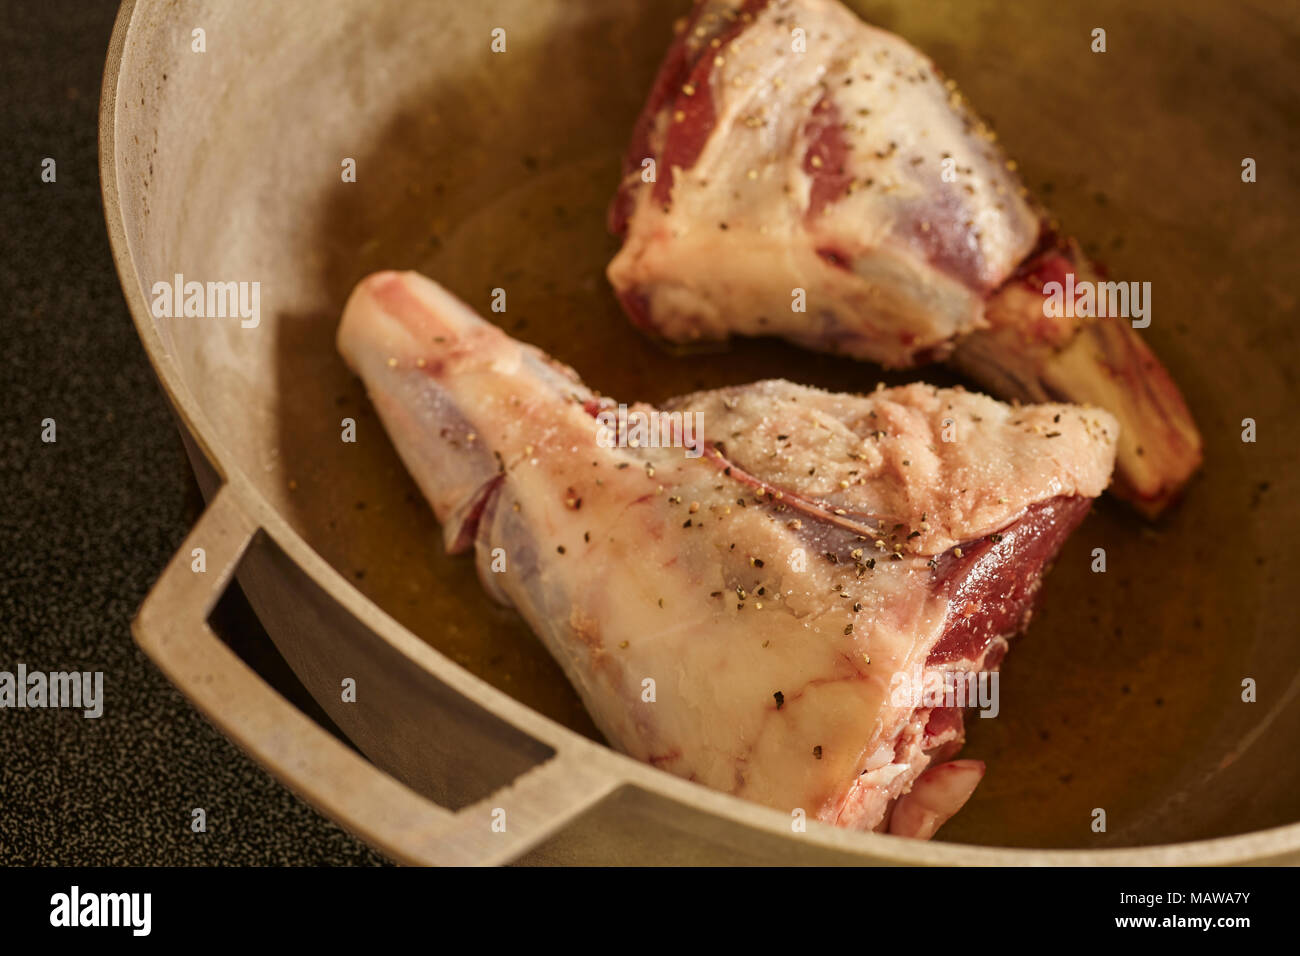 two lamb shanks searing in a pot Stock Photo